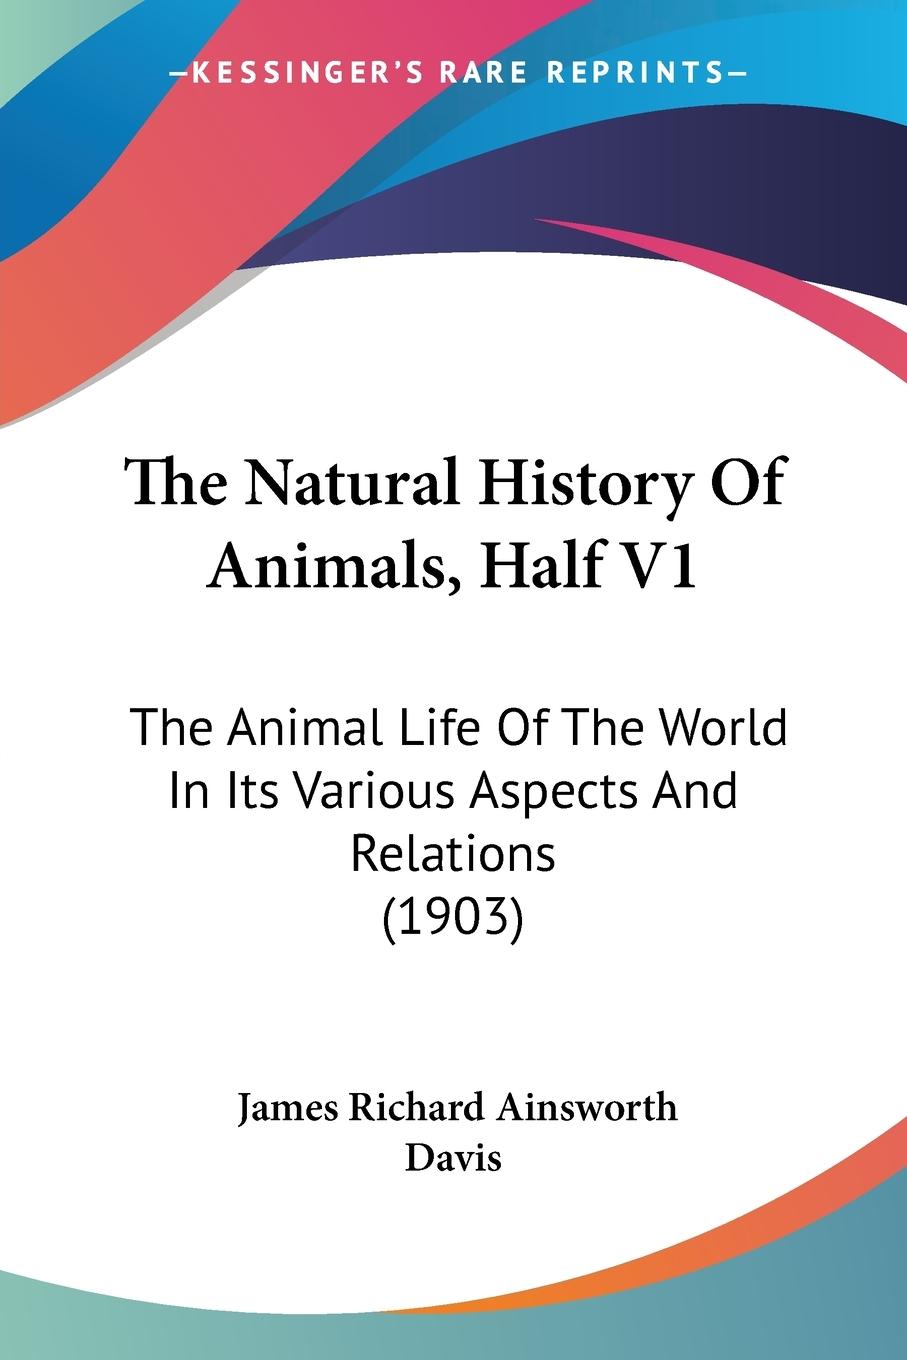 The Natural History Of Animals, Half V1: The Animal Life Of The World In Its Various Aspects And Relations (1903)